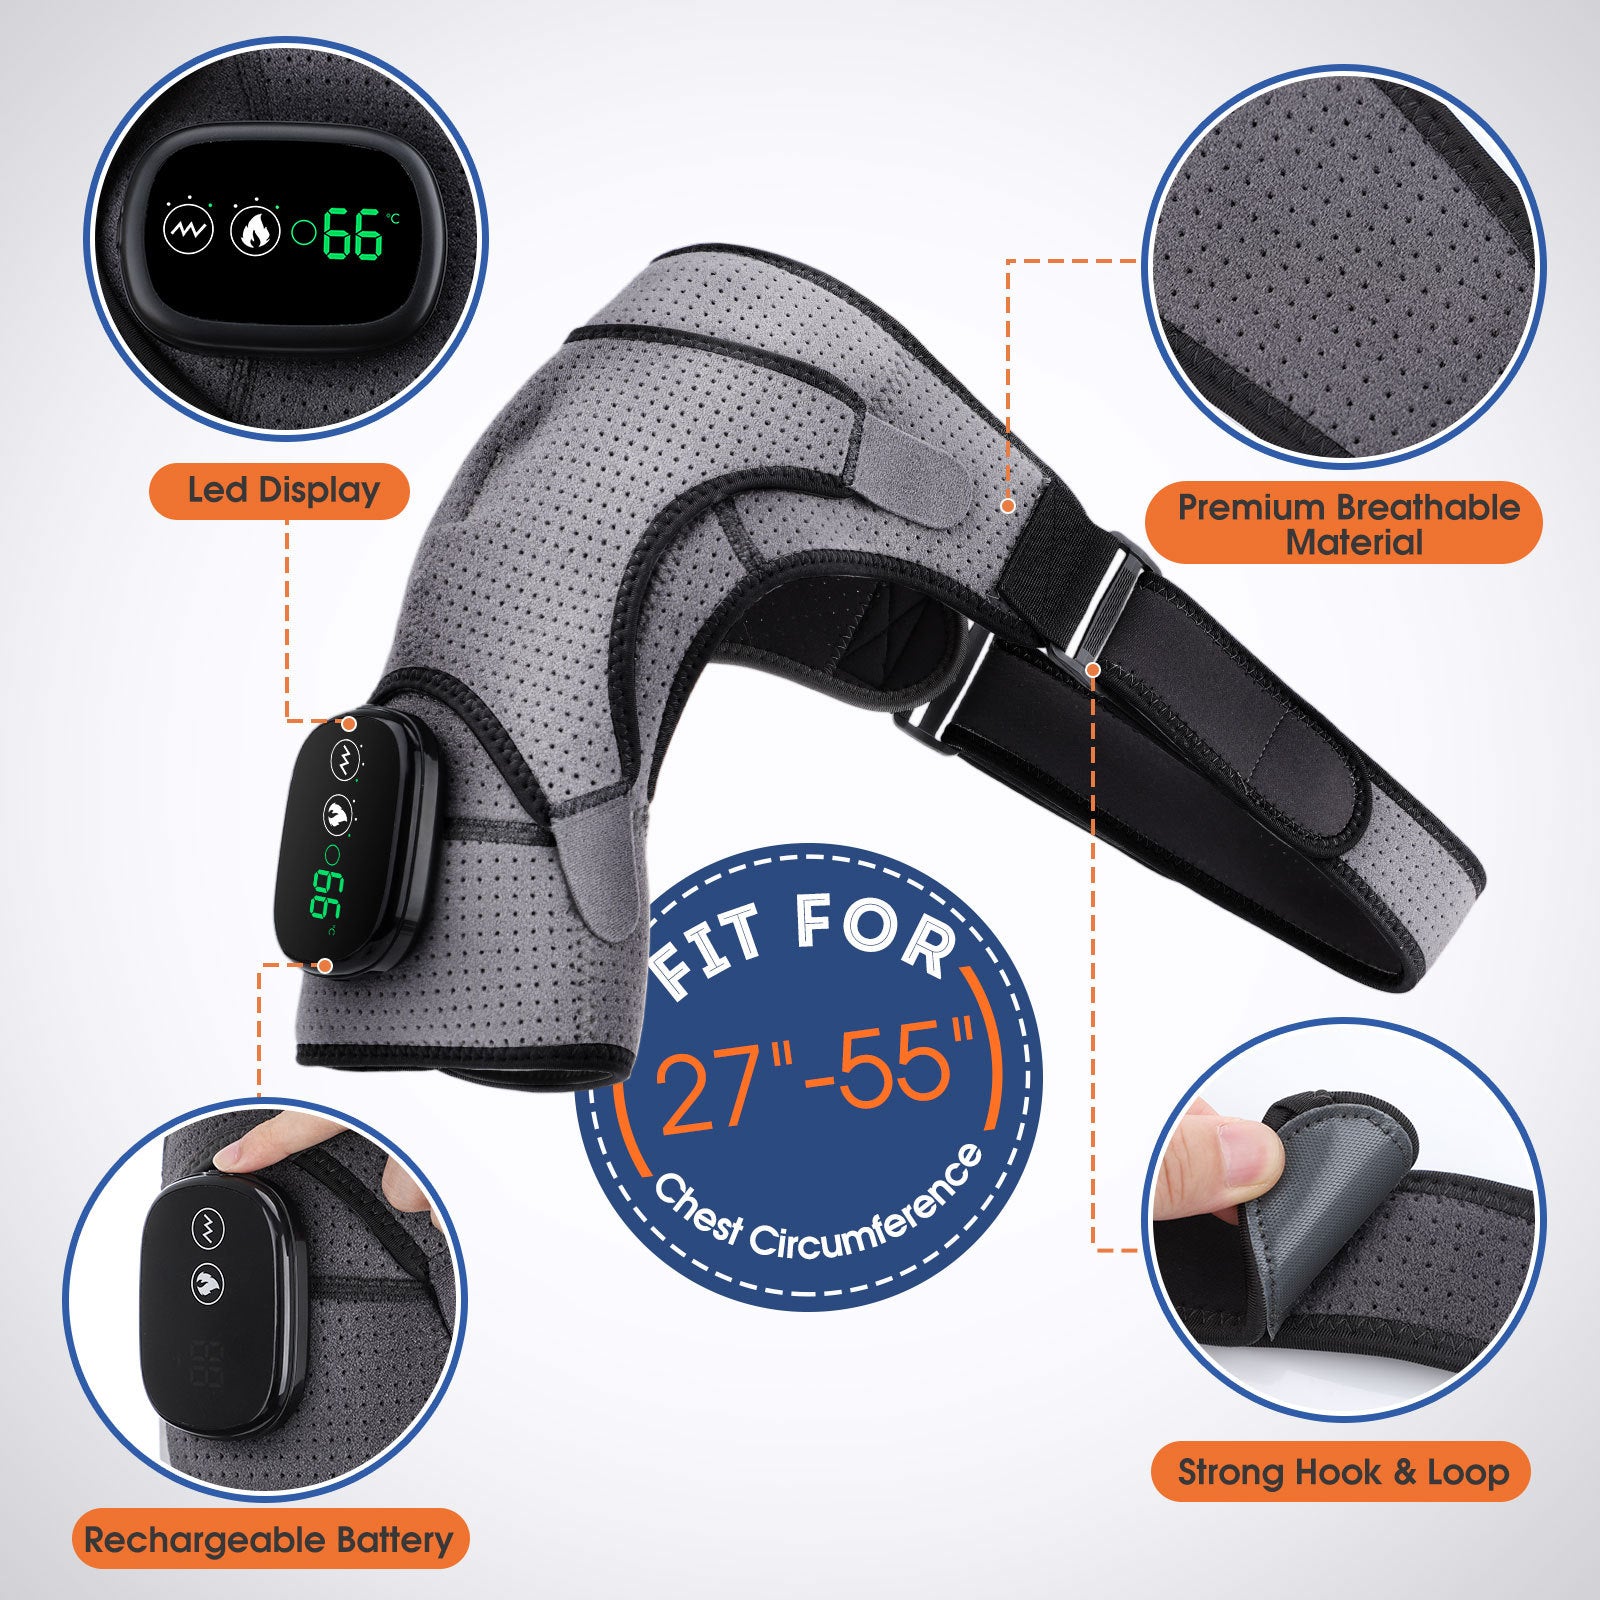 Electric Heating Shoulder Pad - Epic@Care